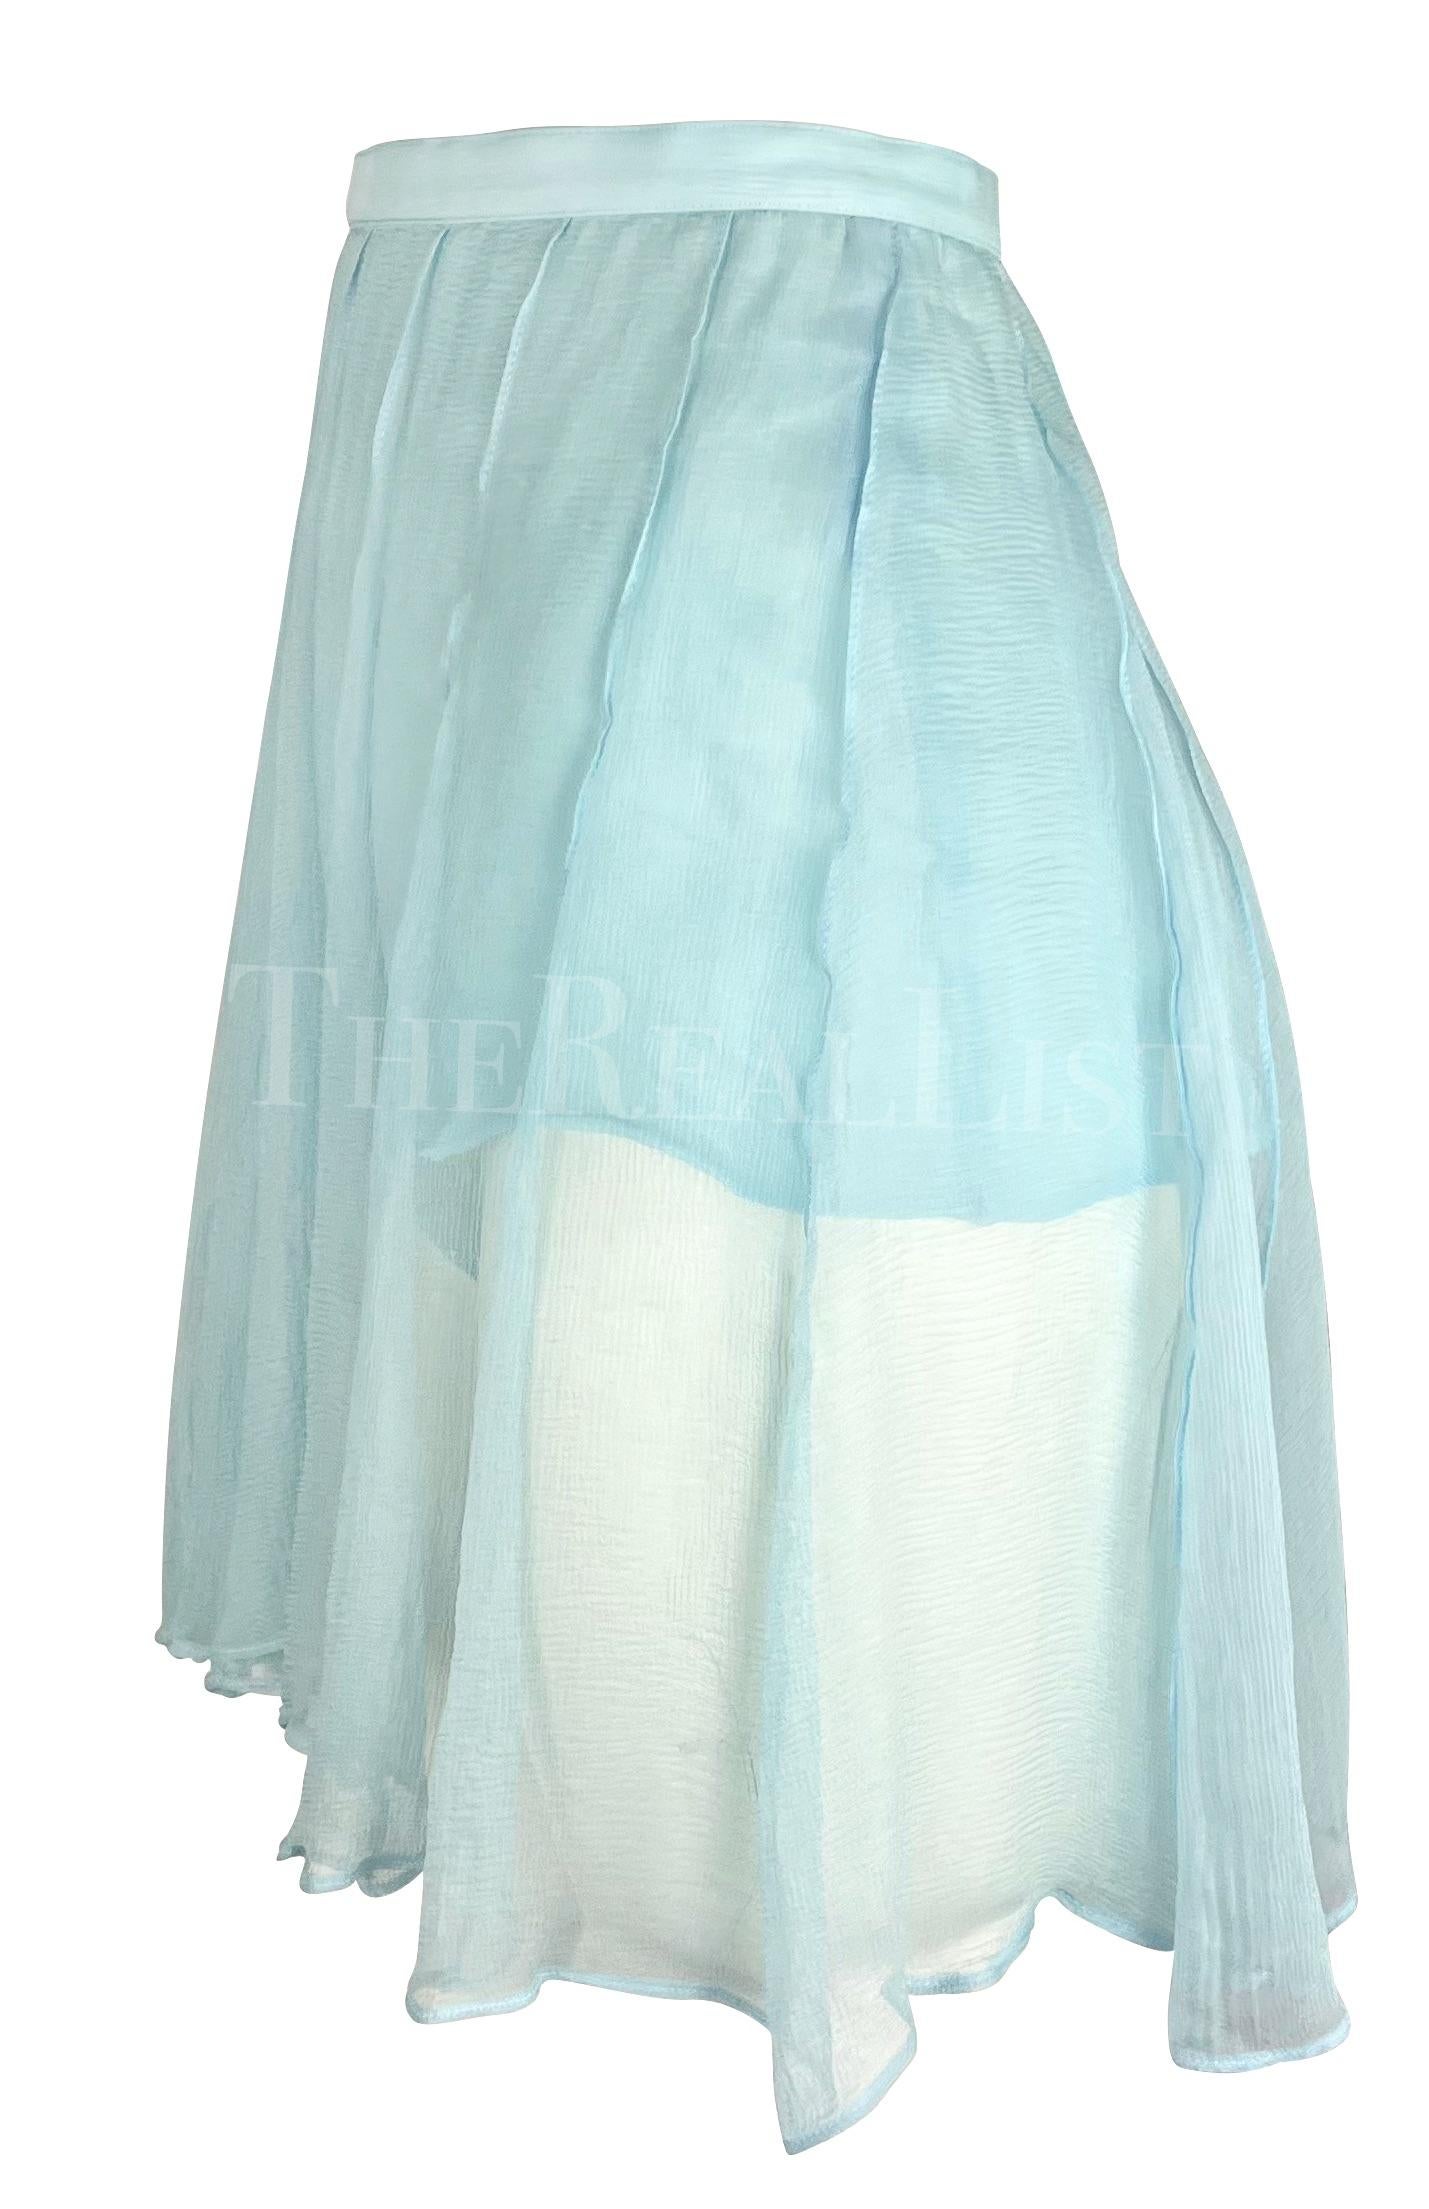 NWT 1990s Thierry Mugler Light Blue Sheer Pleated Silk Skirt Short Combo In Excellent Condition For Sale In West Hollywood, CA